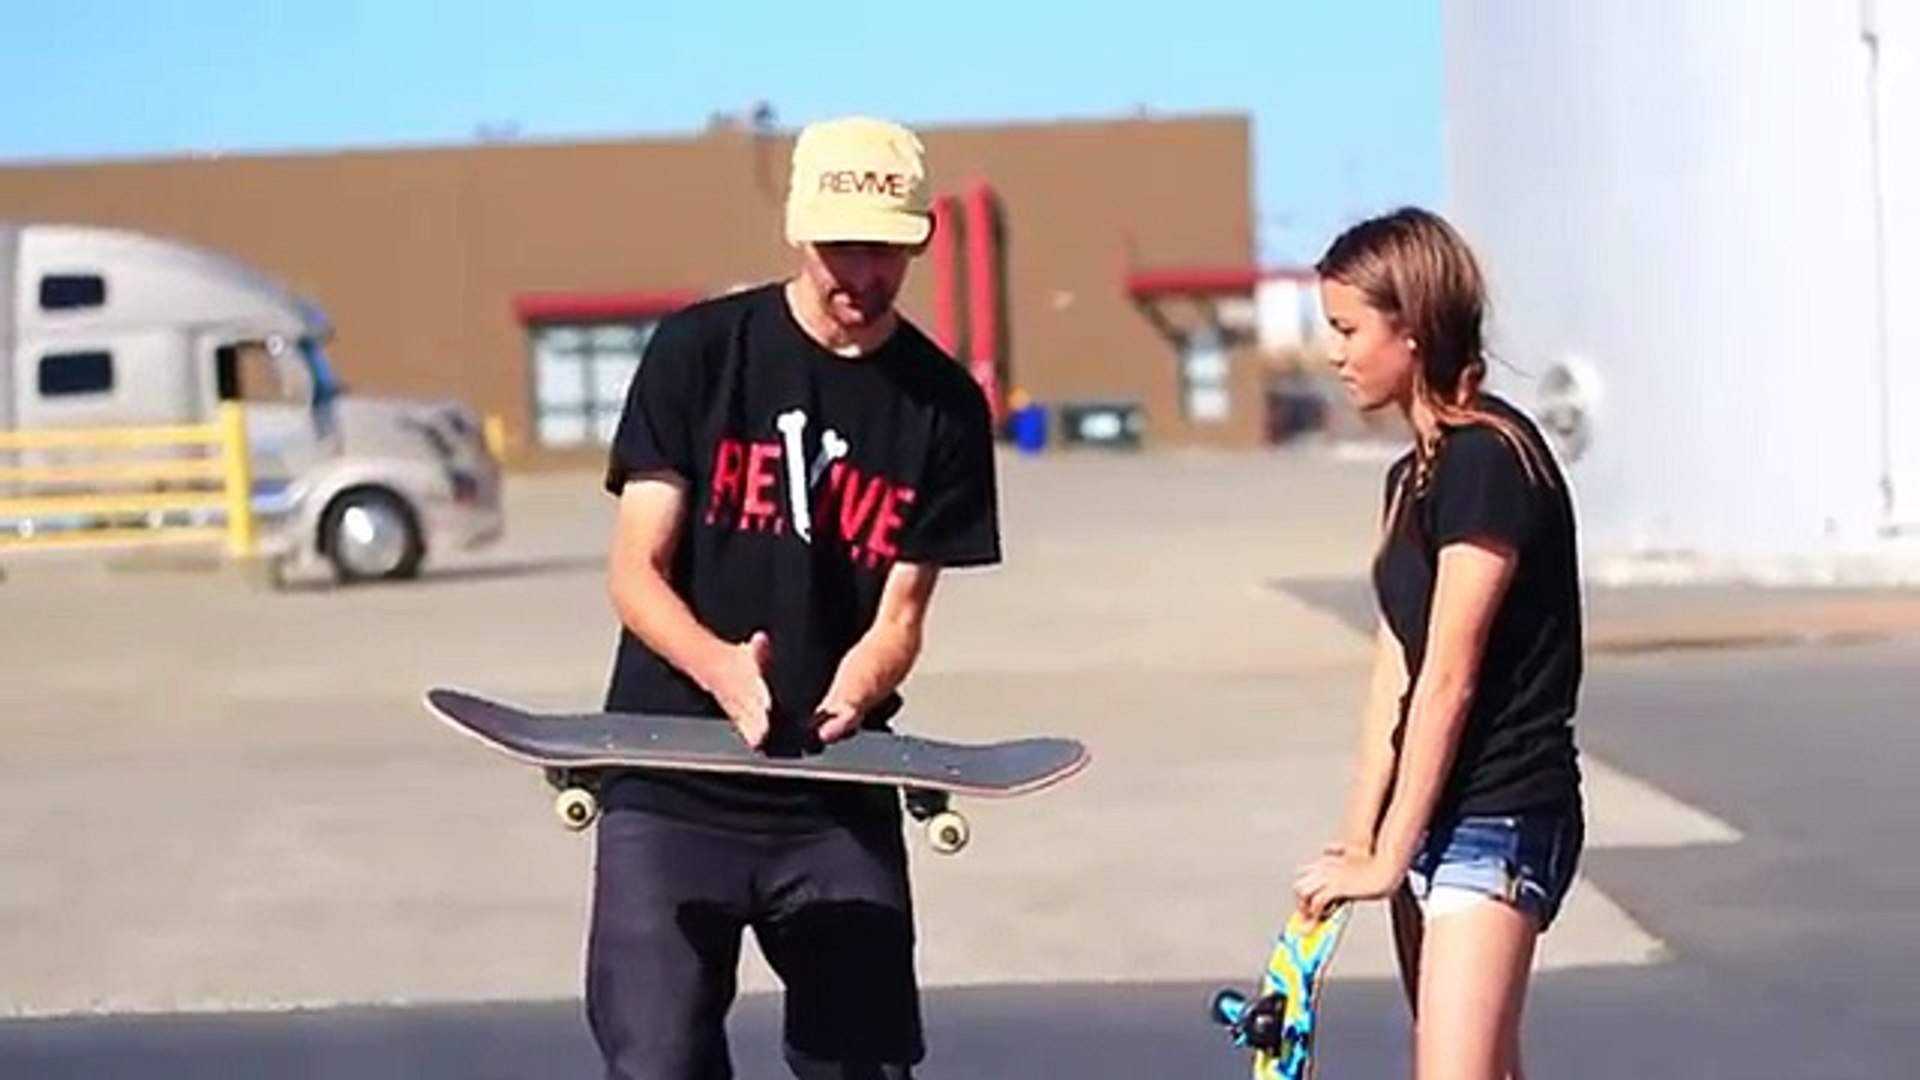 GIRL LEARNS HER FIRST SKATEBOARD TRICKS | EP 3 OLLIE FIRST STEPS - Vidéo  Dailymotion